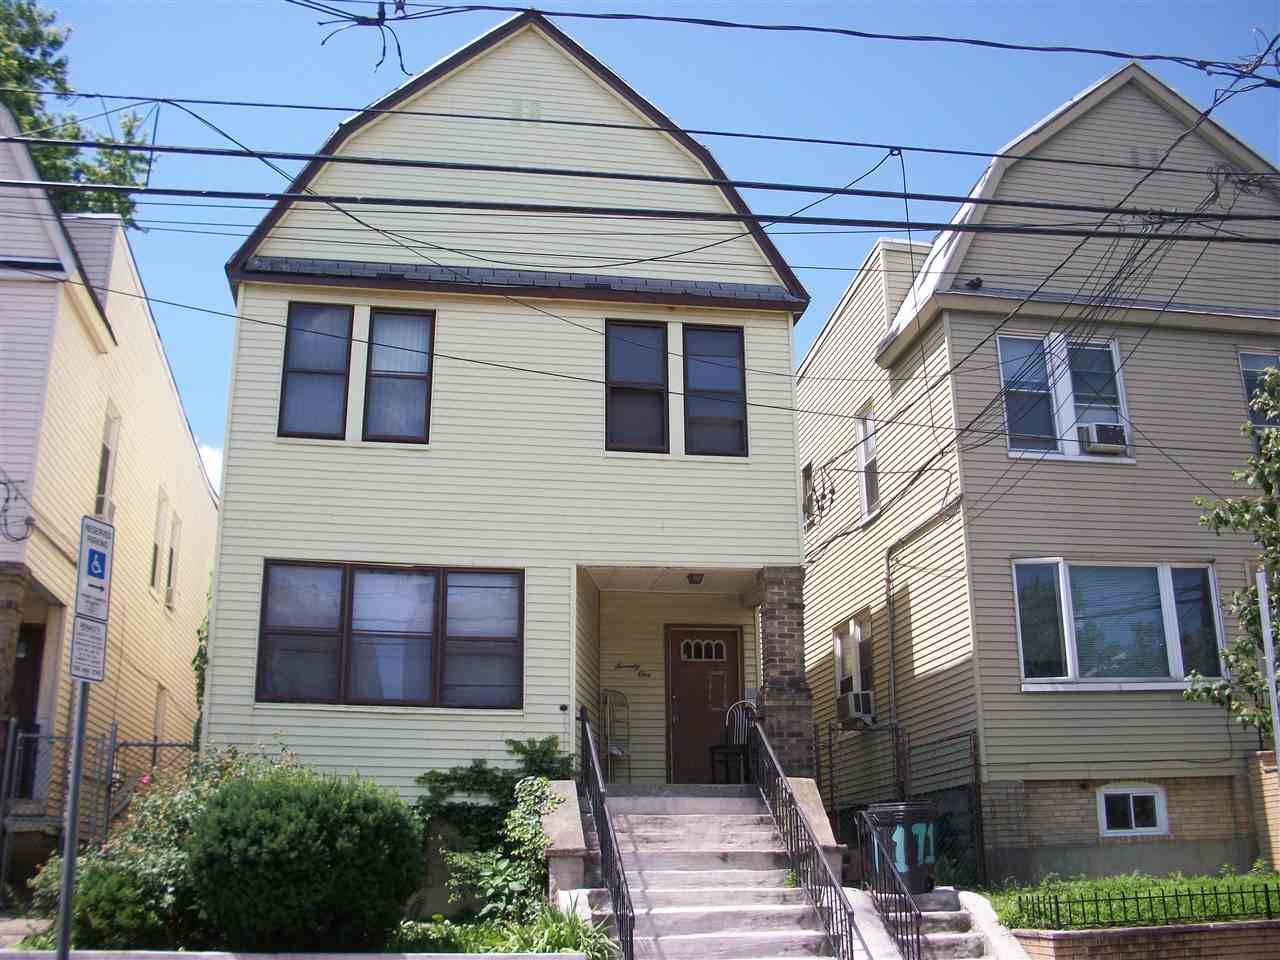 2 BEDROOM APARTMENT - 2 BR New Jersey